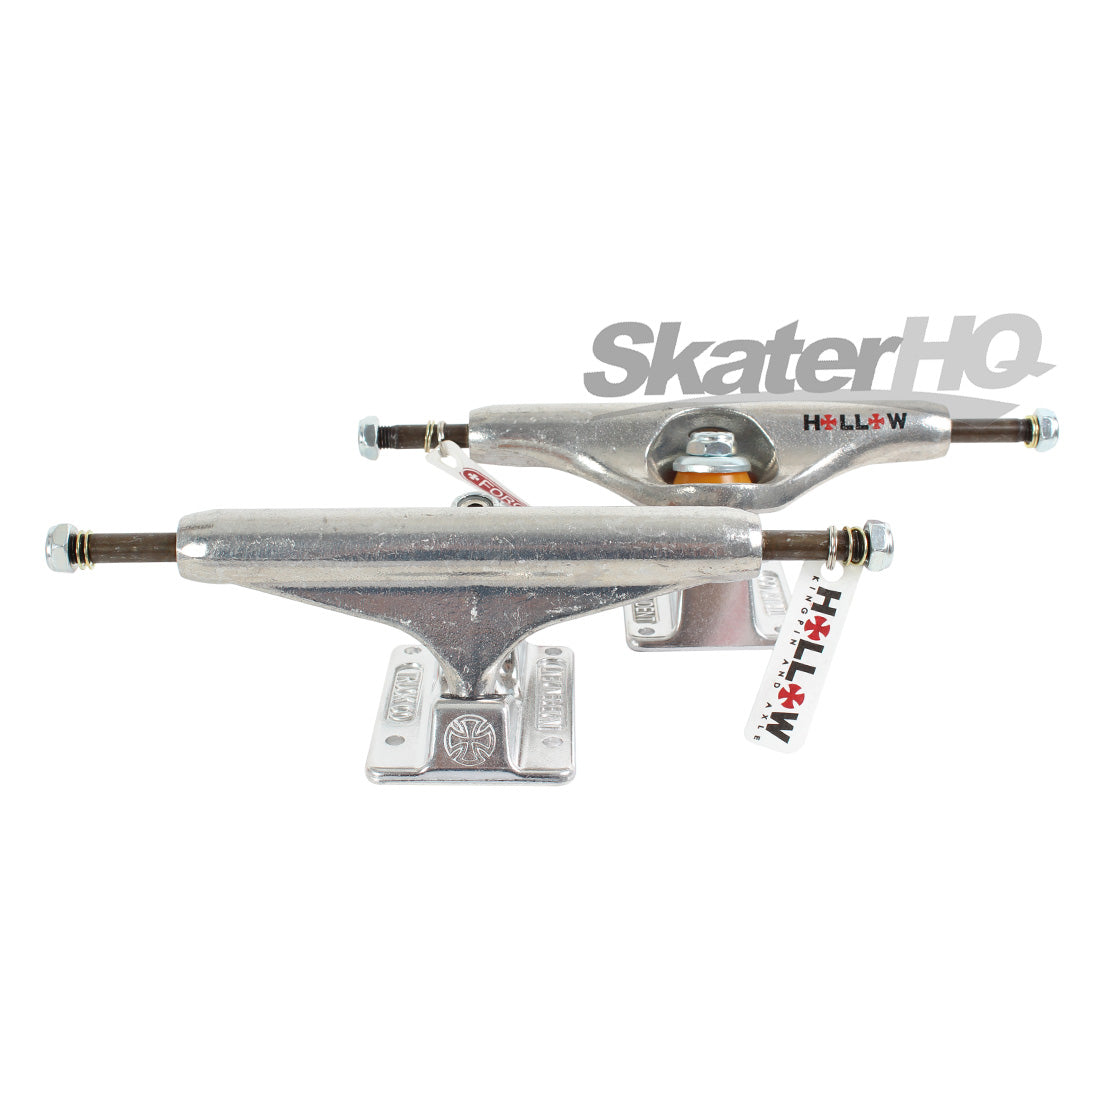 Independent 159 Forged Hollow Trucks - Silver Skateboard Trucks